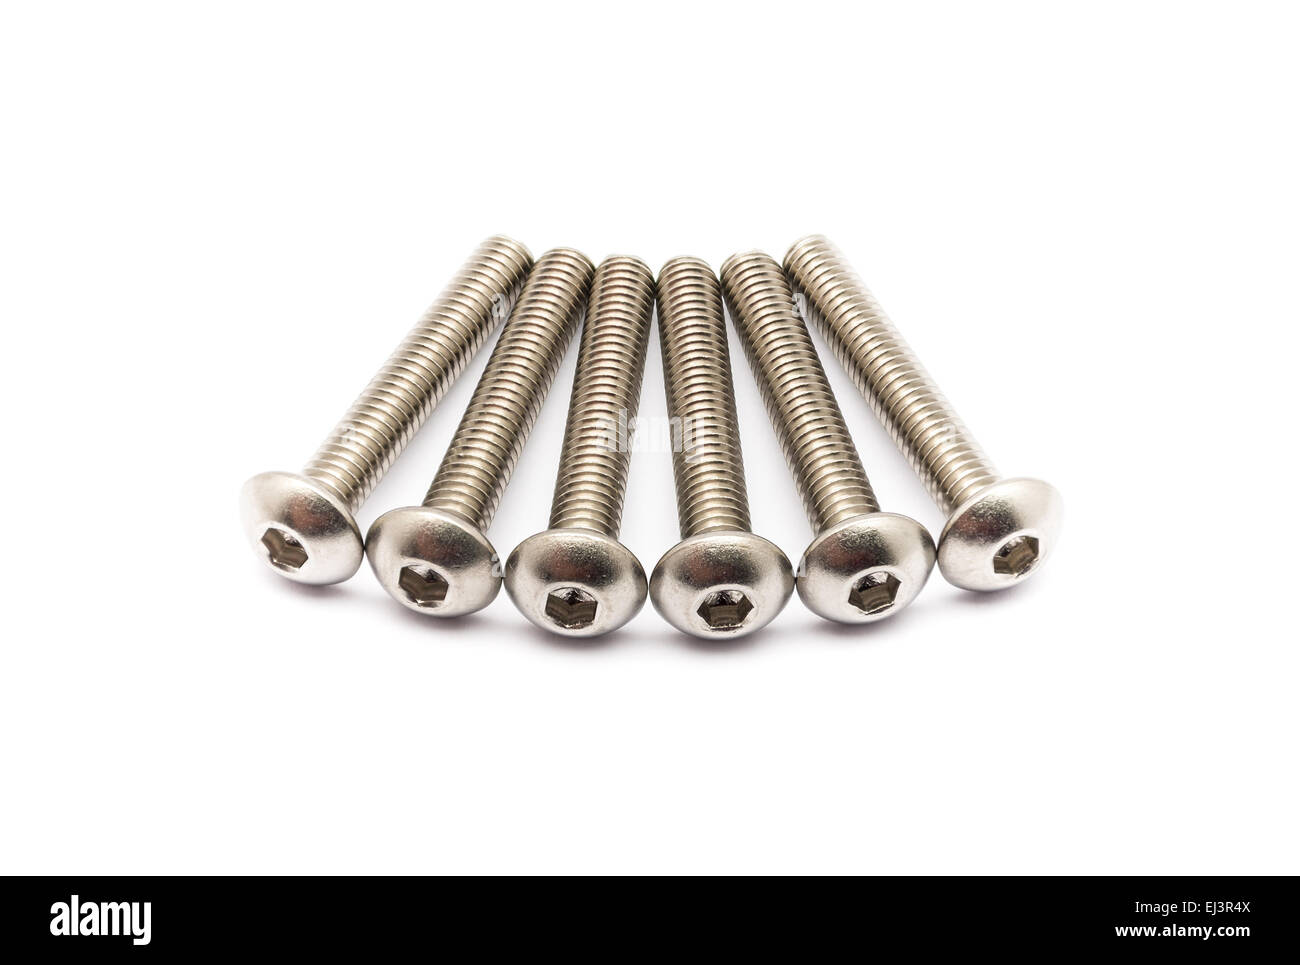 Pile of Ball-Hex-Head Stainless Steel Bolts. Stock Photo